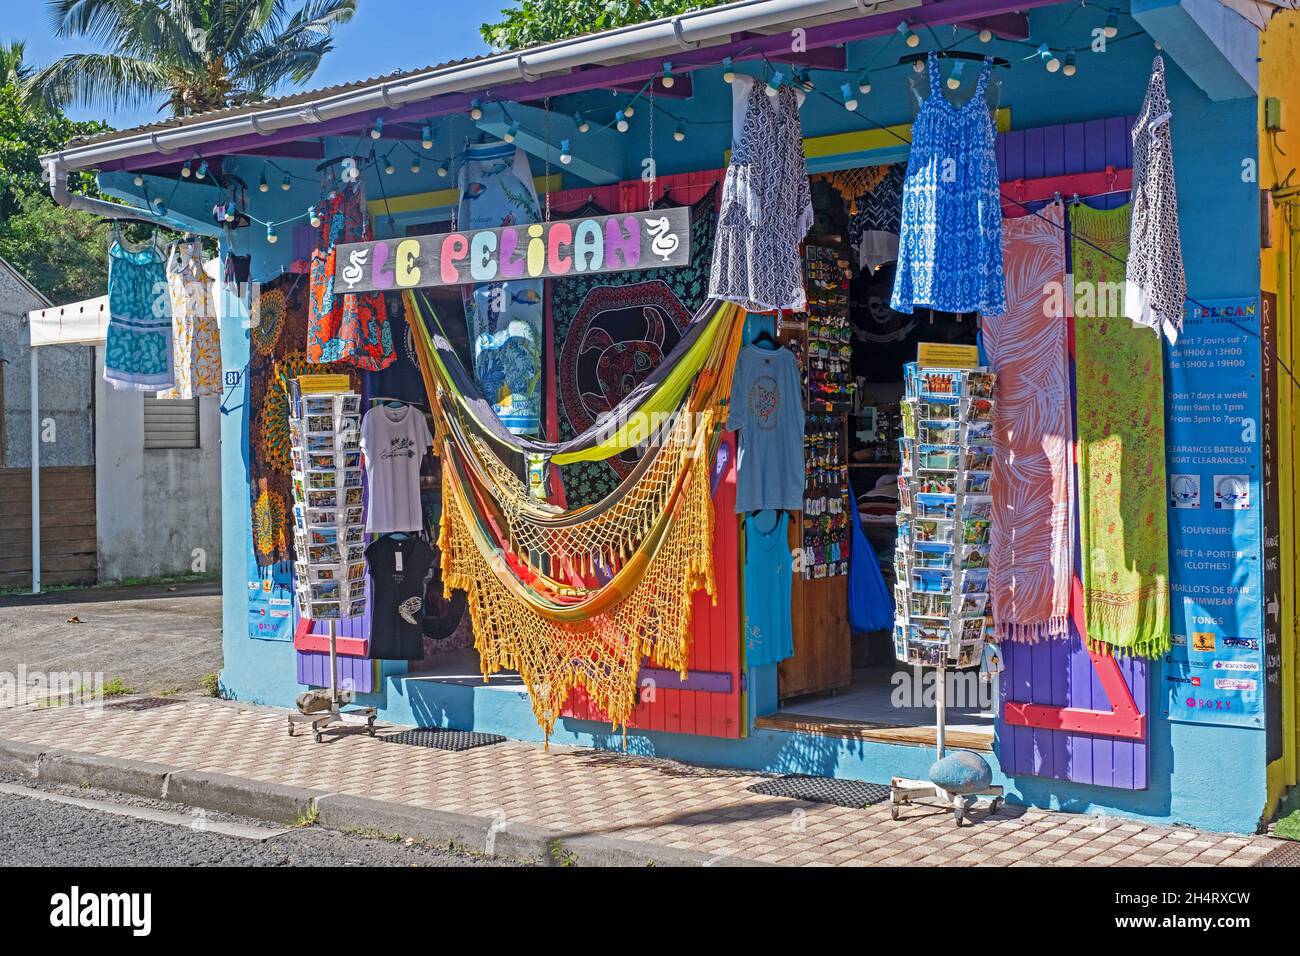 Souvenir shop in the village Deshaies on the northwest coast of Basse-Terre Island, archipelago of Guadeloupe, Lesser Antilles in the Caribbean Sea Stock Photo